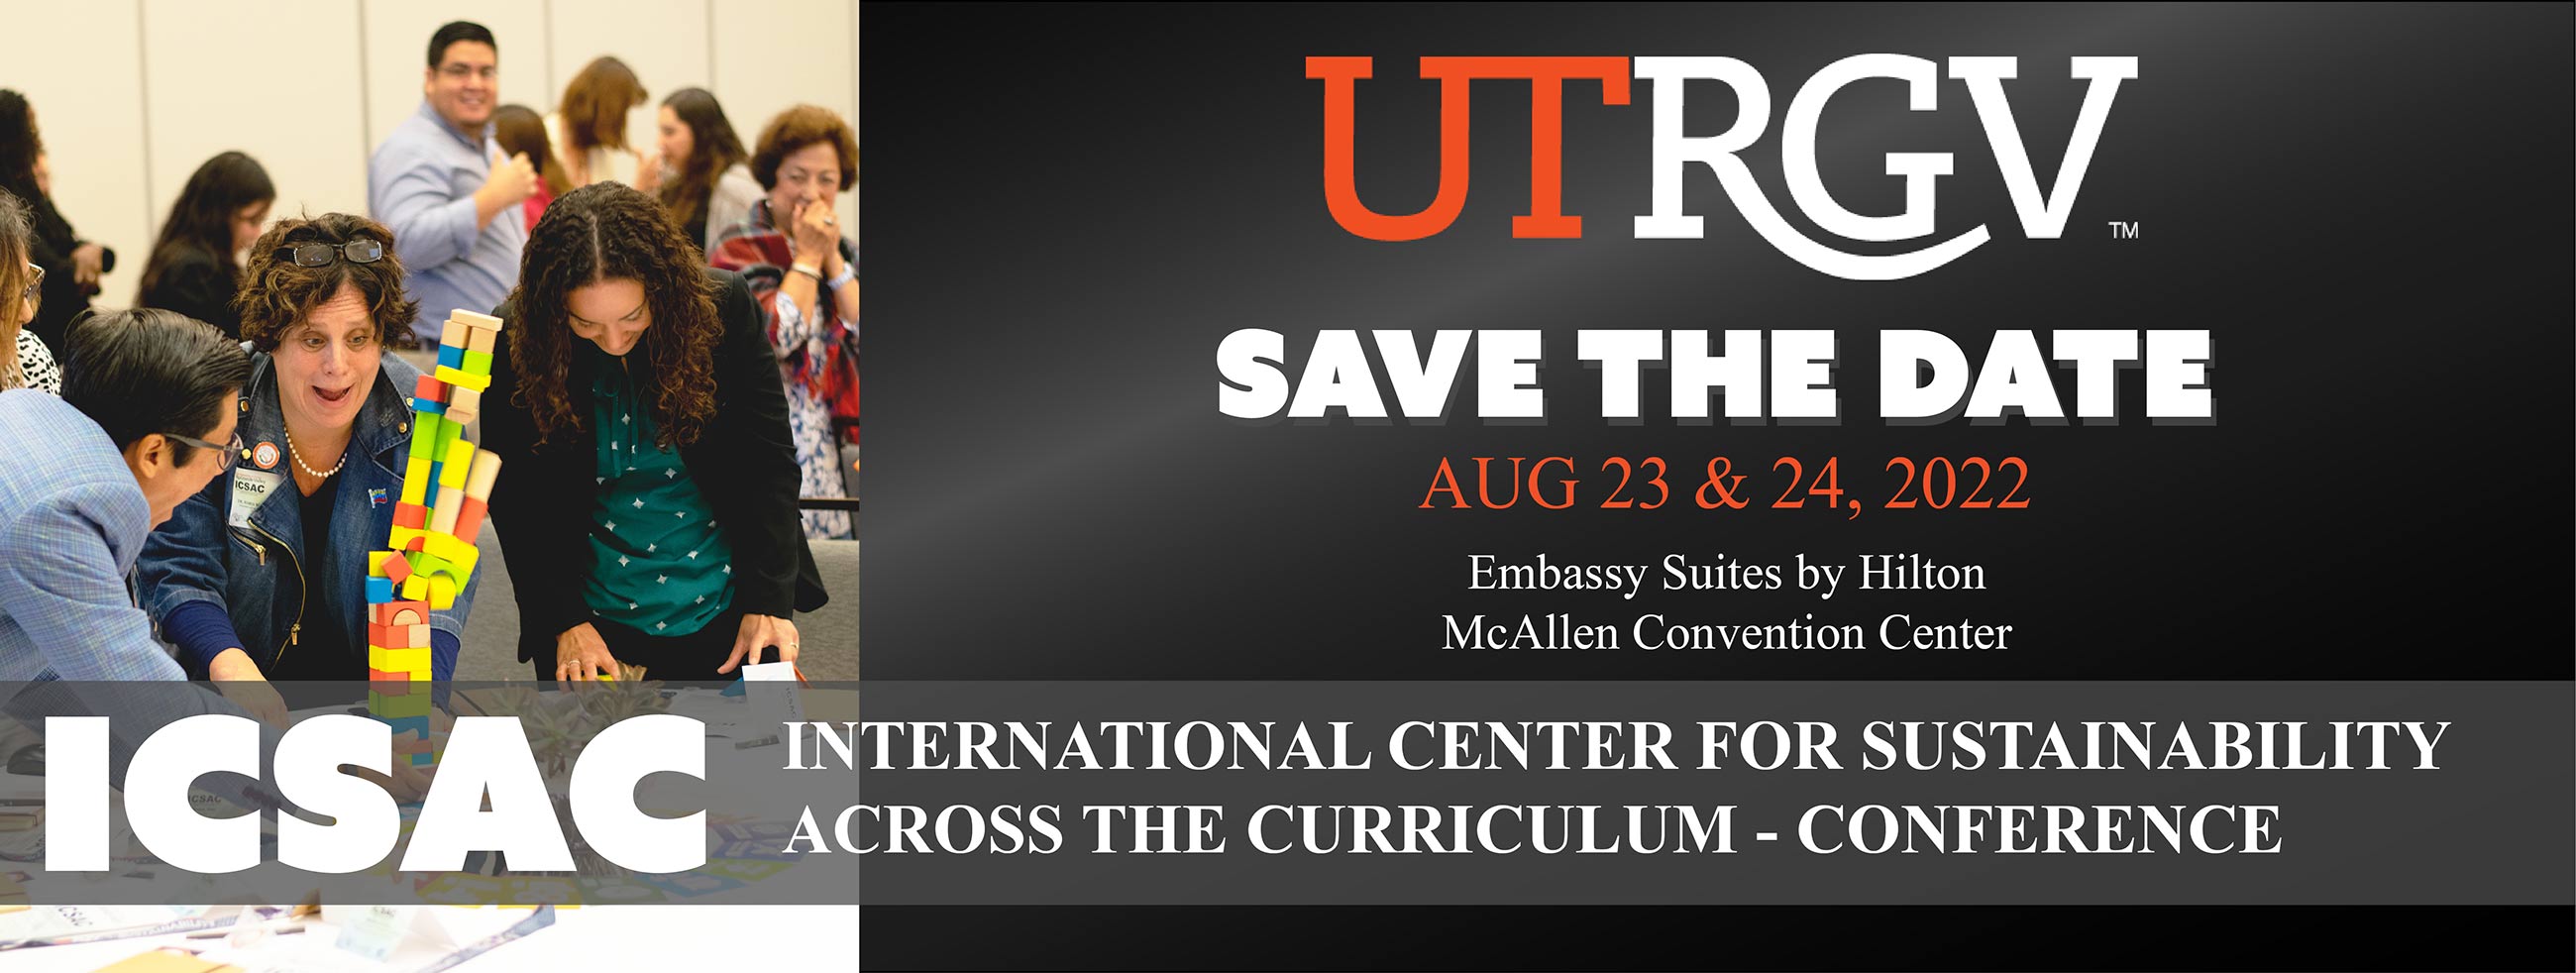 ICSAC Save the Date August 23 to August 24, 2022 at the Embassy Suites by Hilton in the McAllen Convention Center Page Banner 